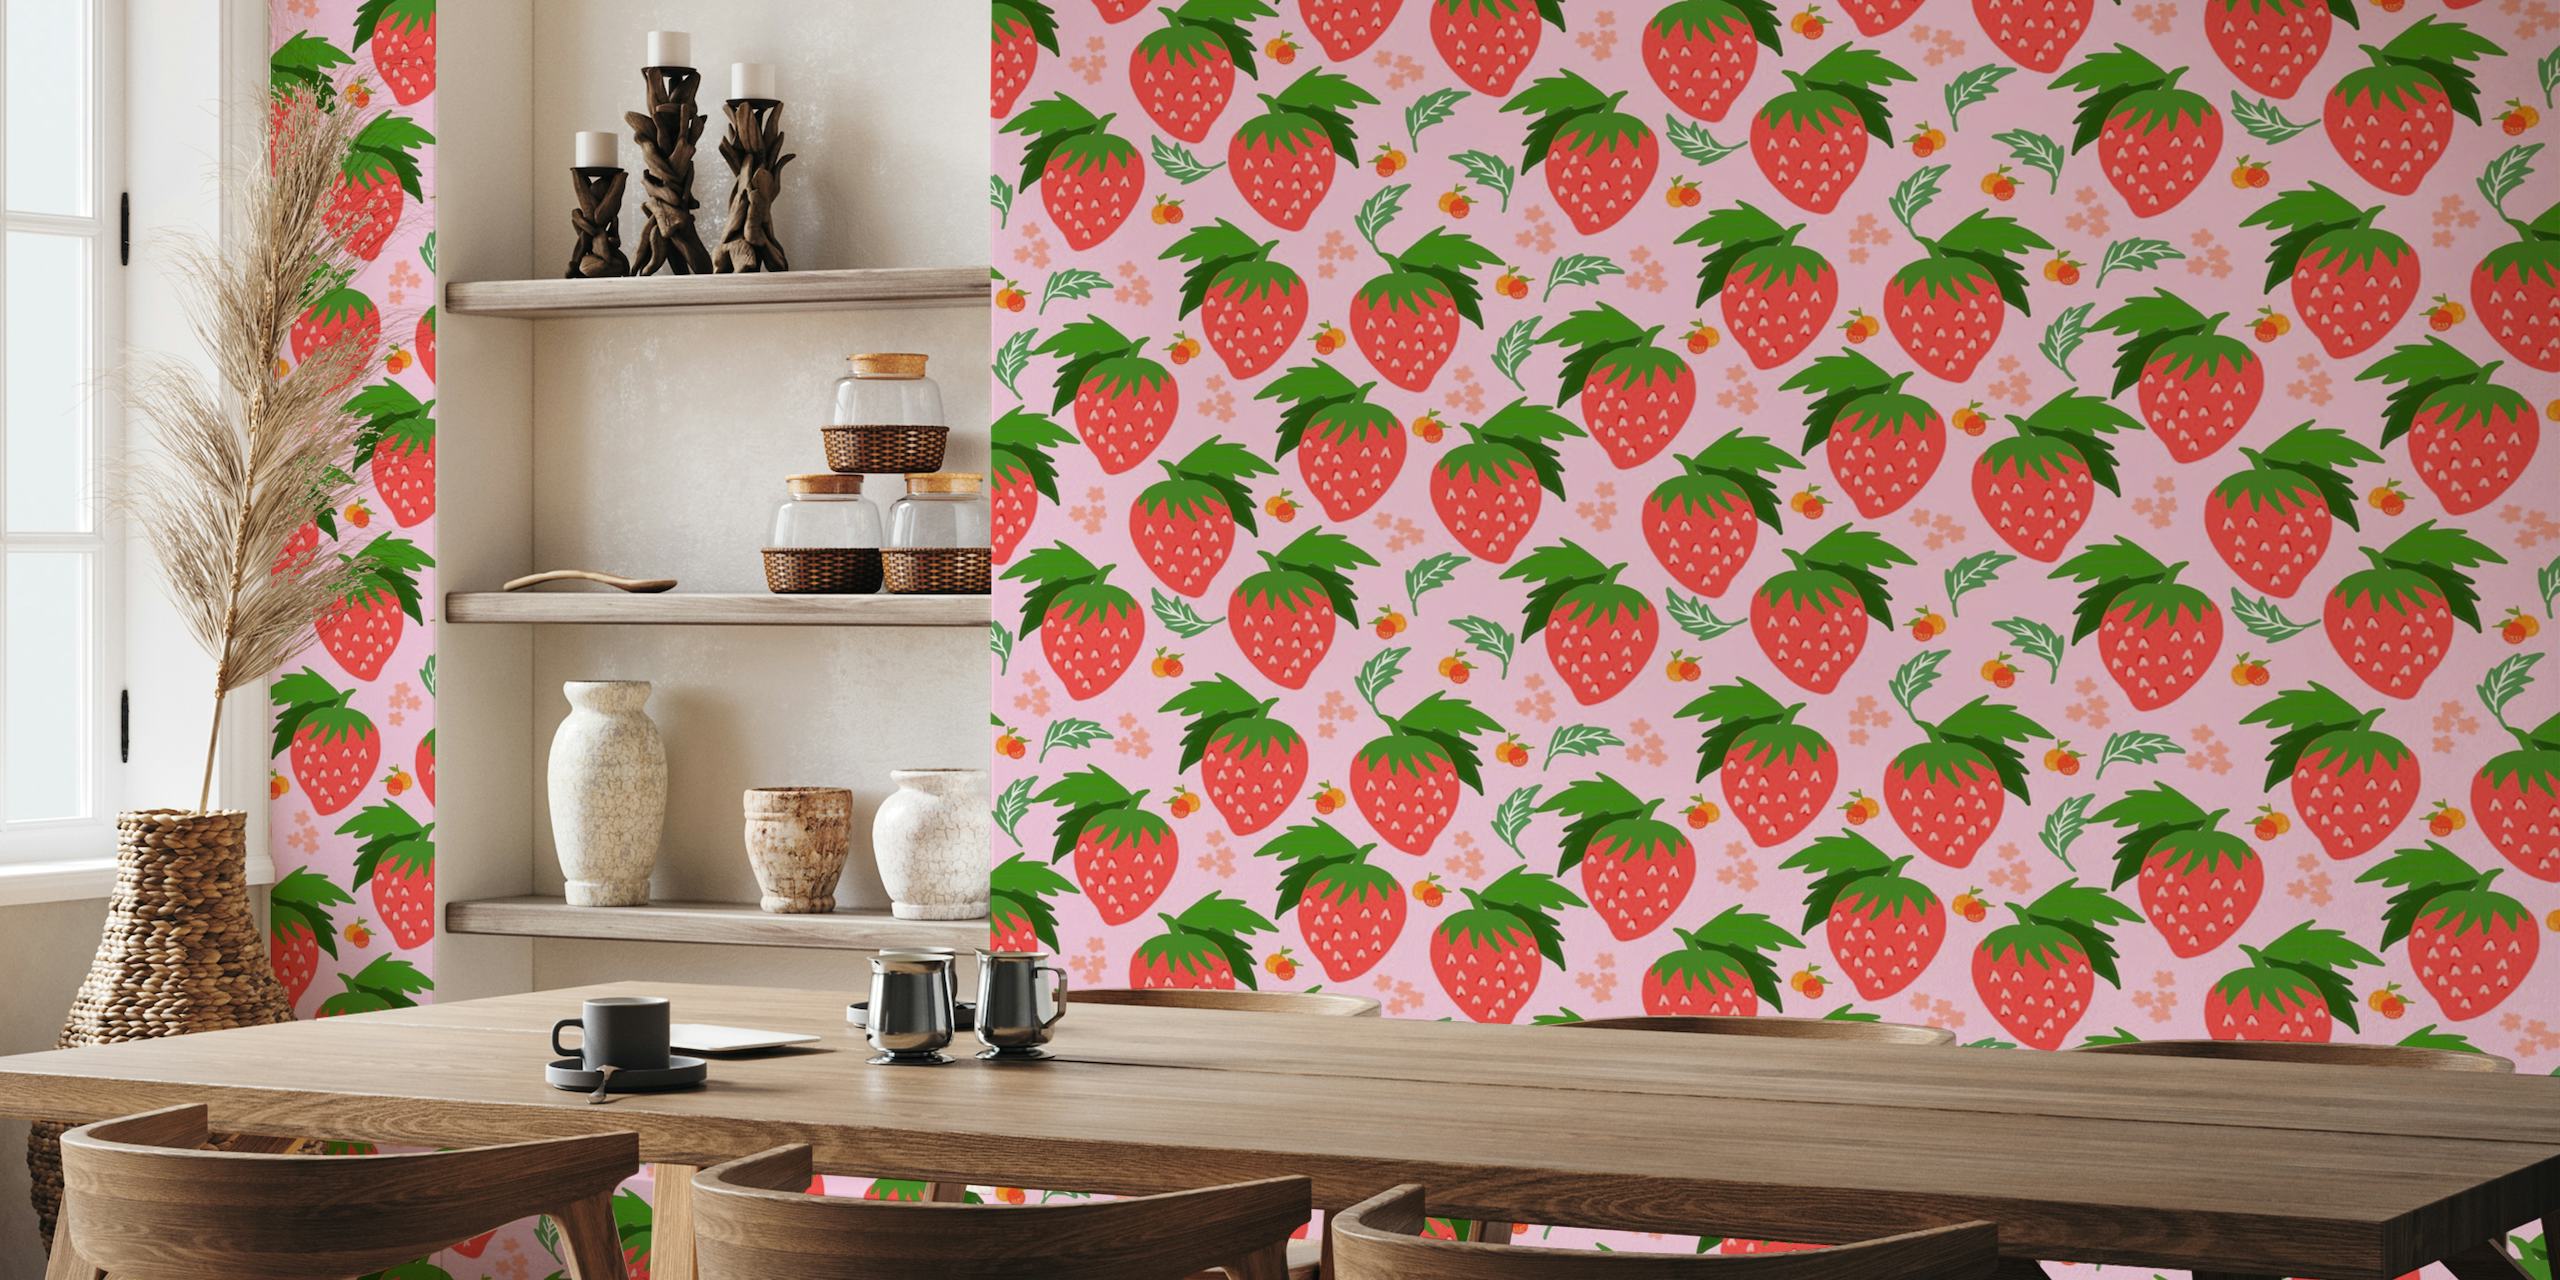 Strawberries and Pink fruit with leaves and elements kawaii style cute pattern carta da parati